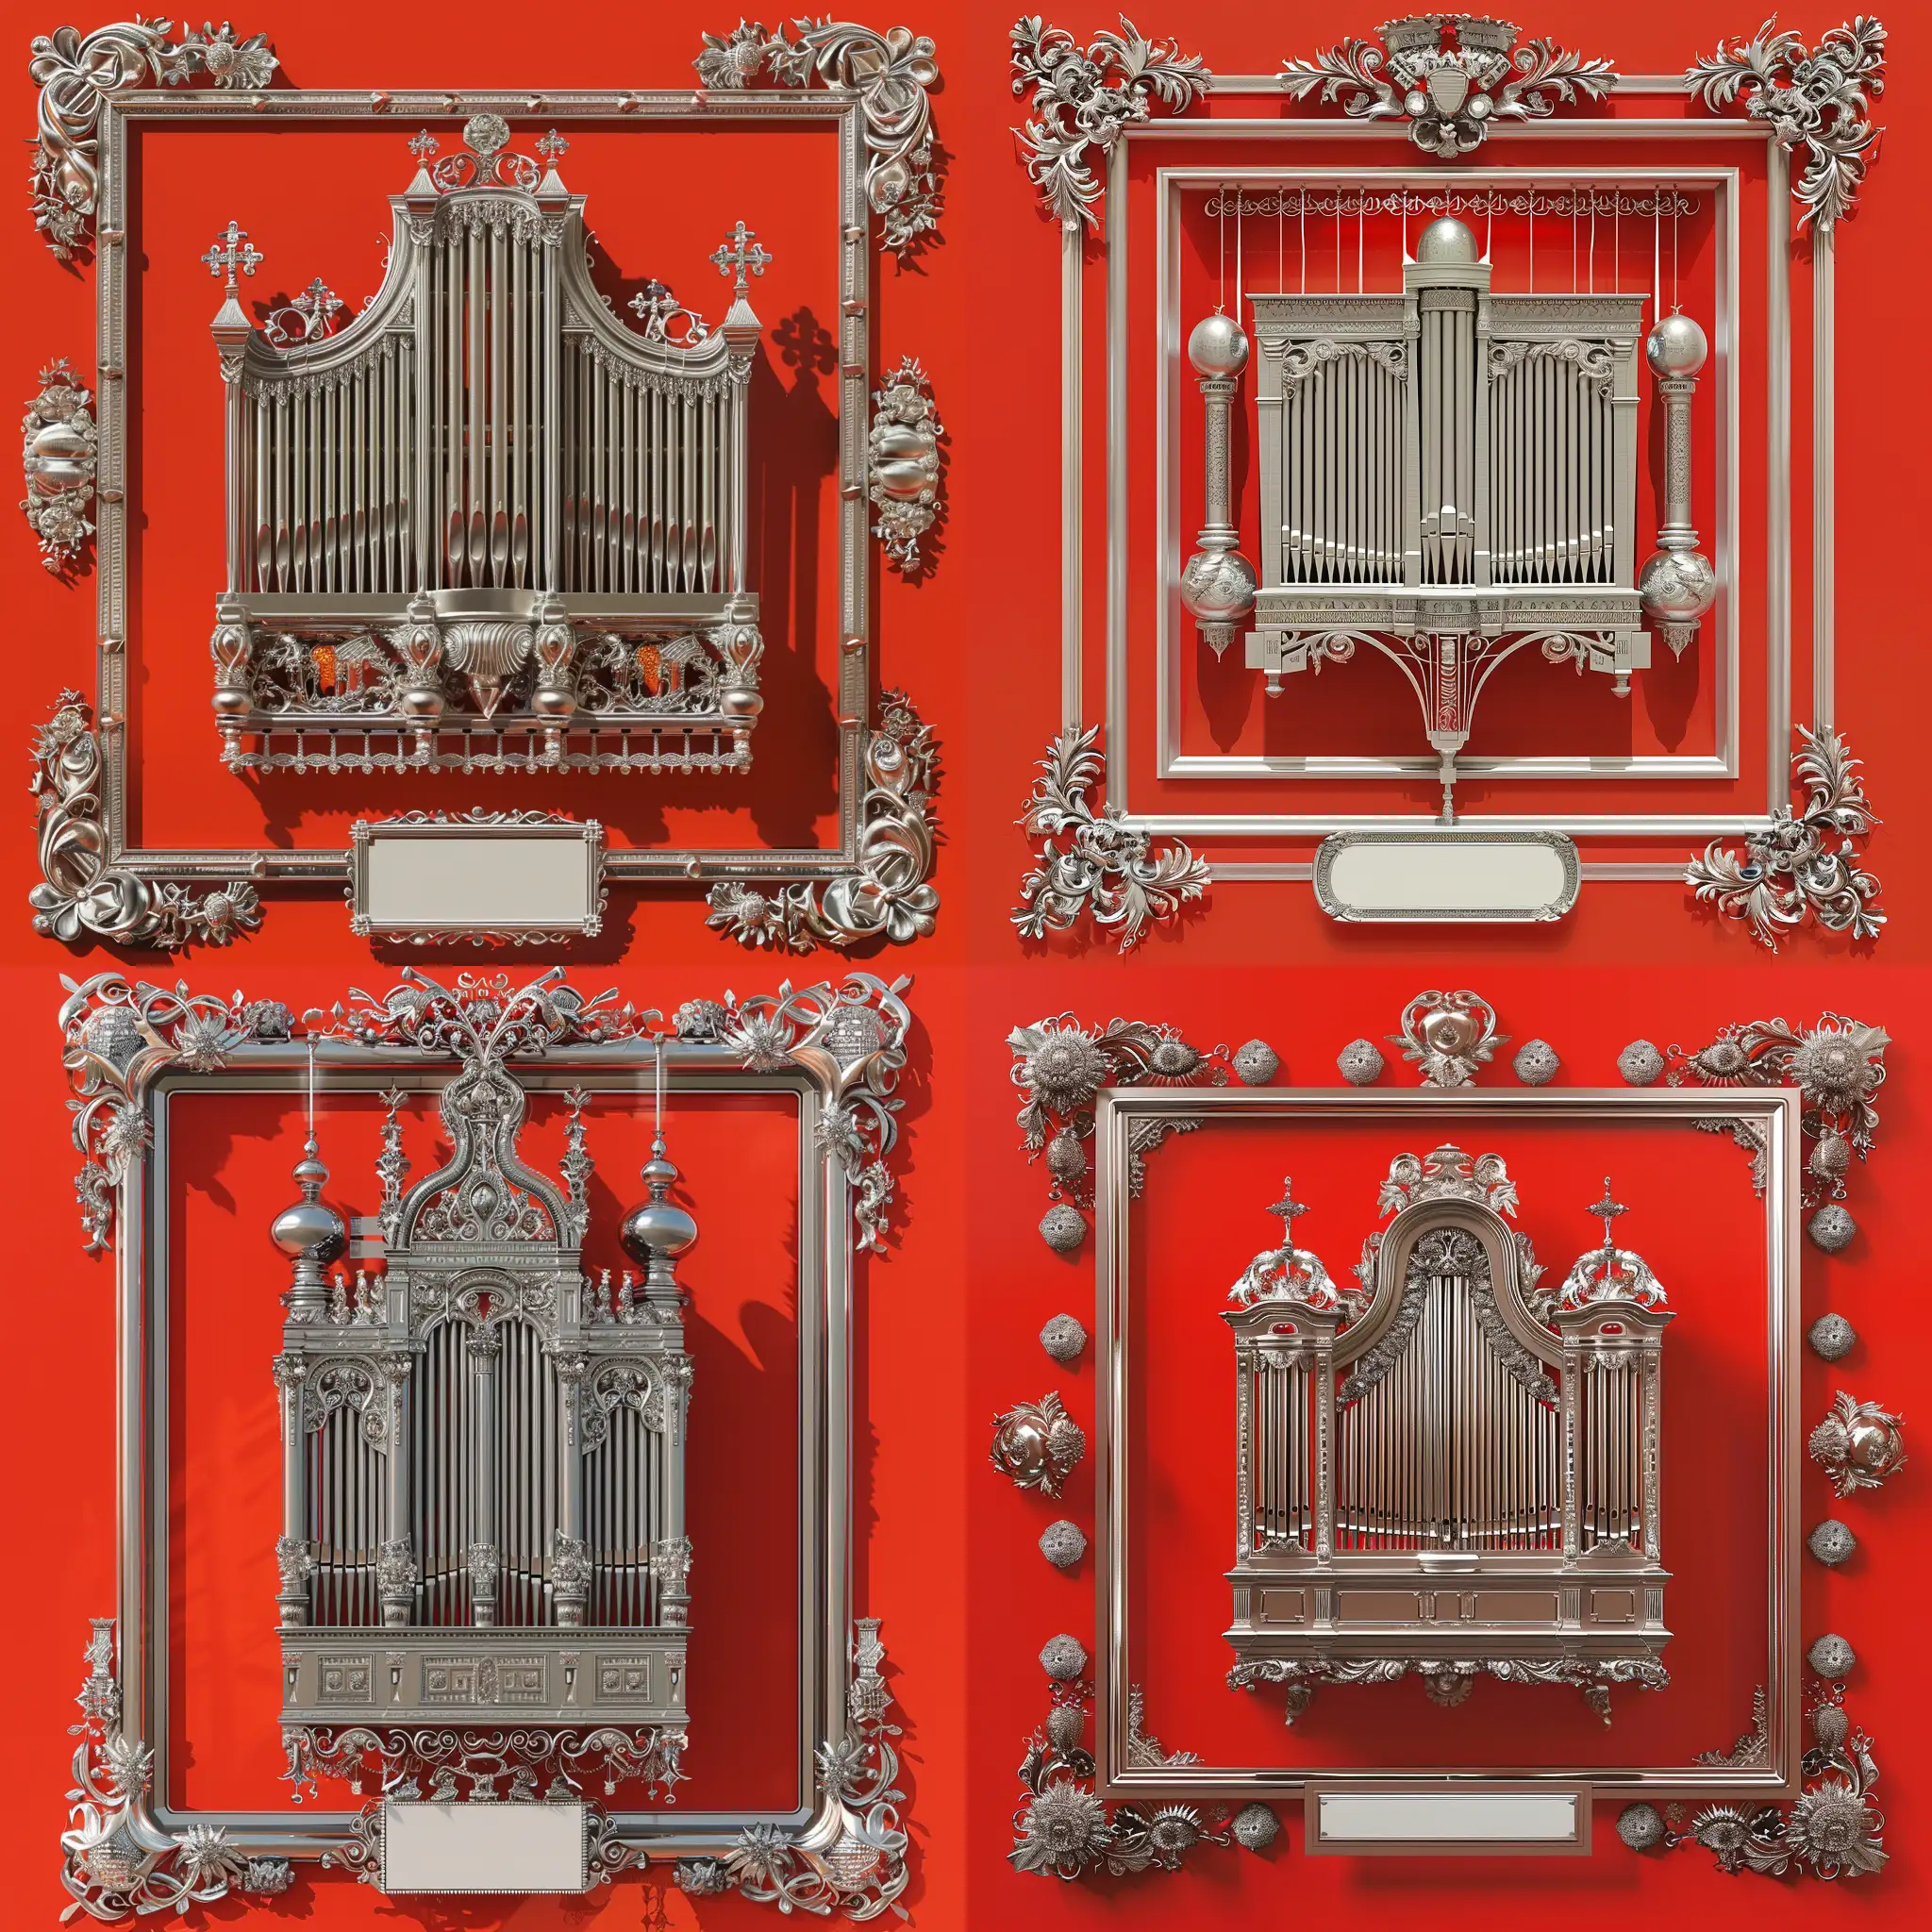 A silver slavic organ, on a bright red background, framed with slavic silver ornaments, with a blank nameplate at the bottom, clean digital painting